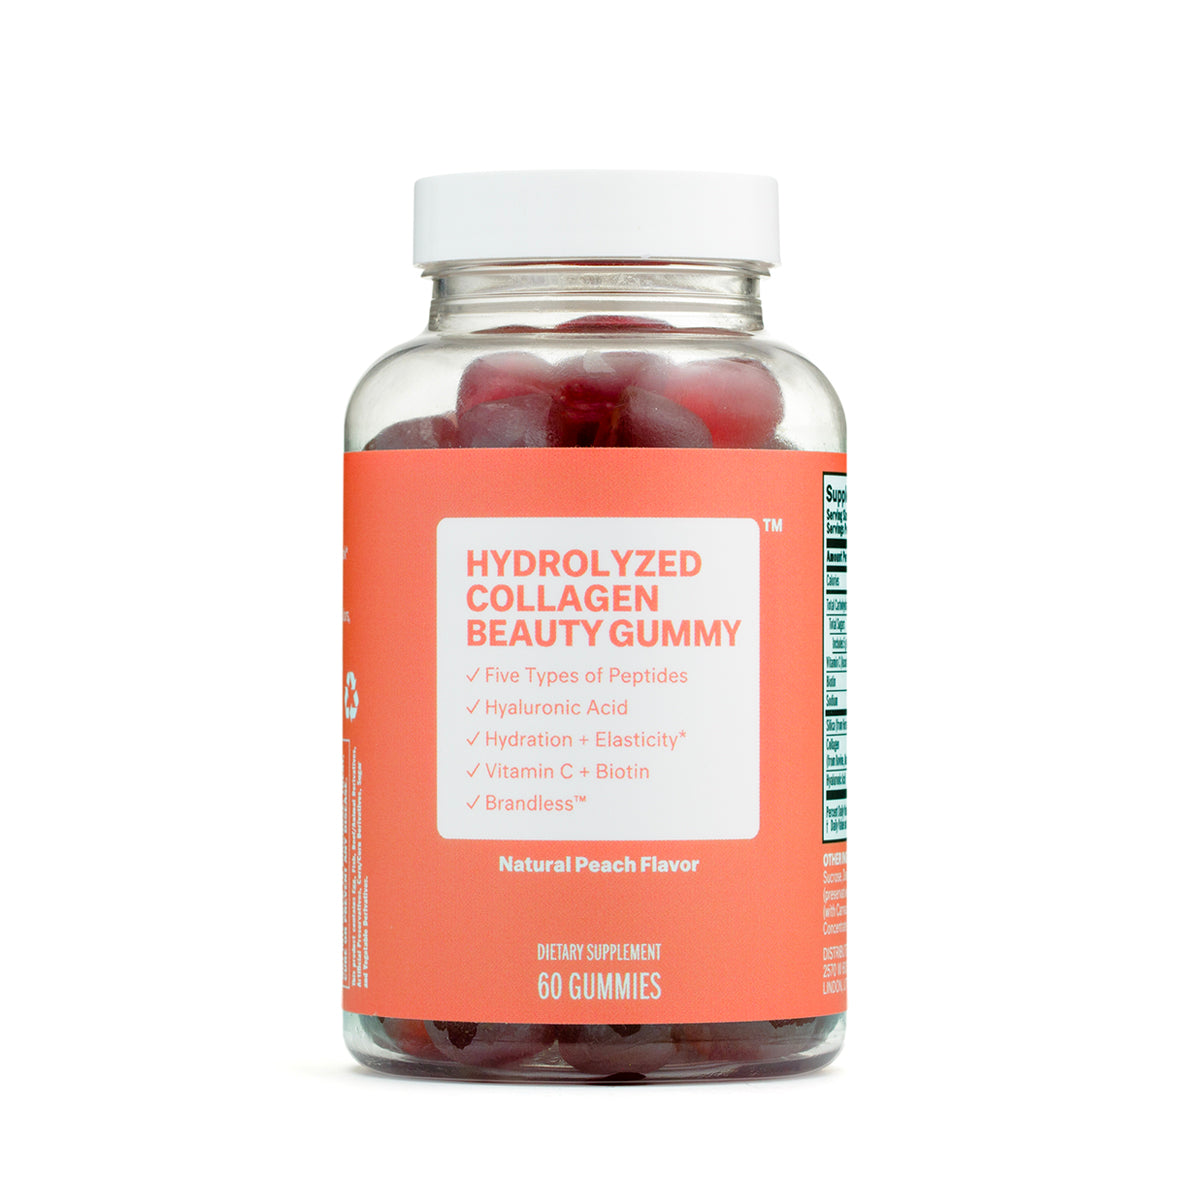 Hydrolyzed collagen beauty gummy. Five types of peptides. Hyaluronic acid. Hydration + Elasticity*. Vitamin C + Biotin. Brandless. Natural peach flavor. Dietary supplement. 60 gummies. Bottle front.